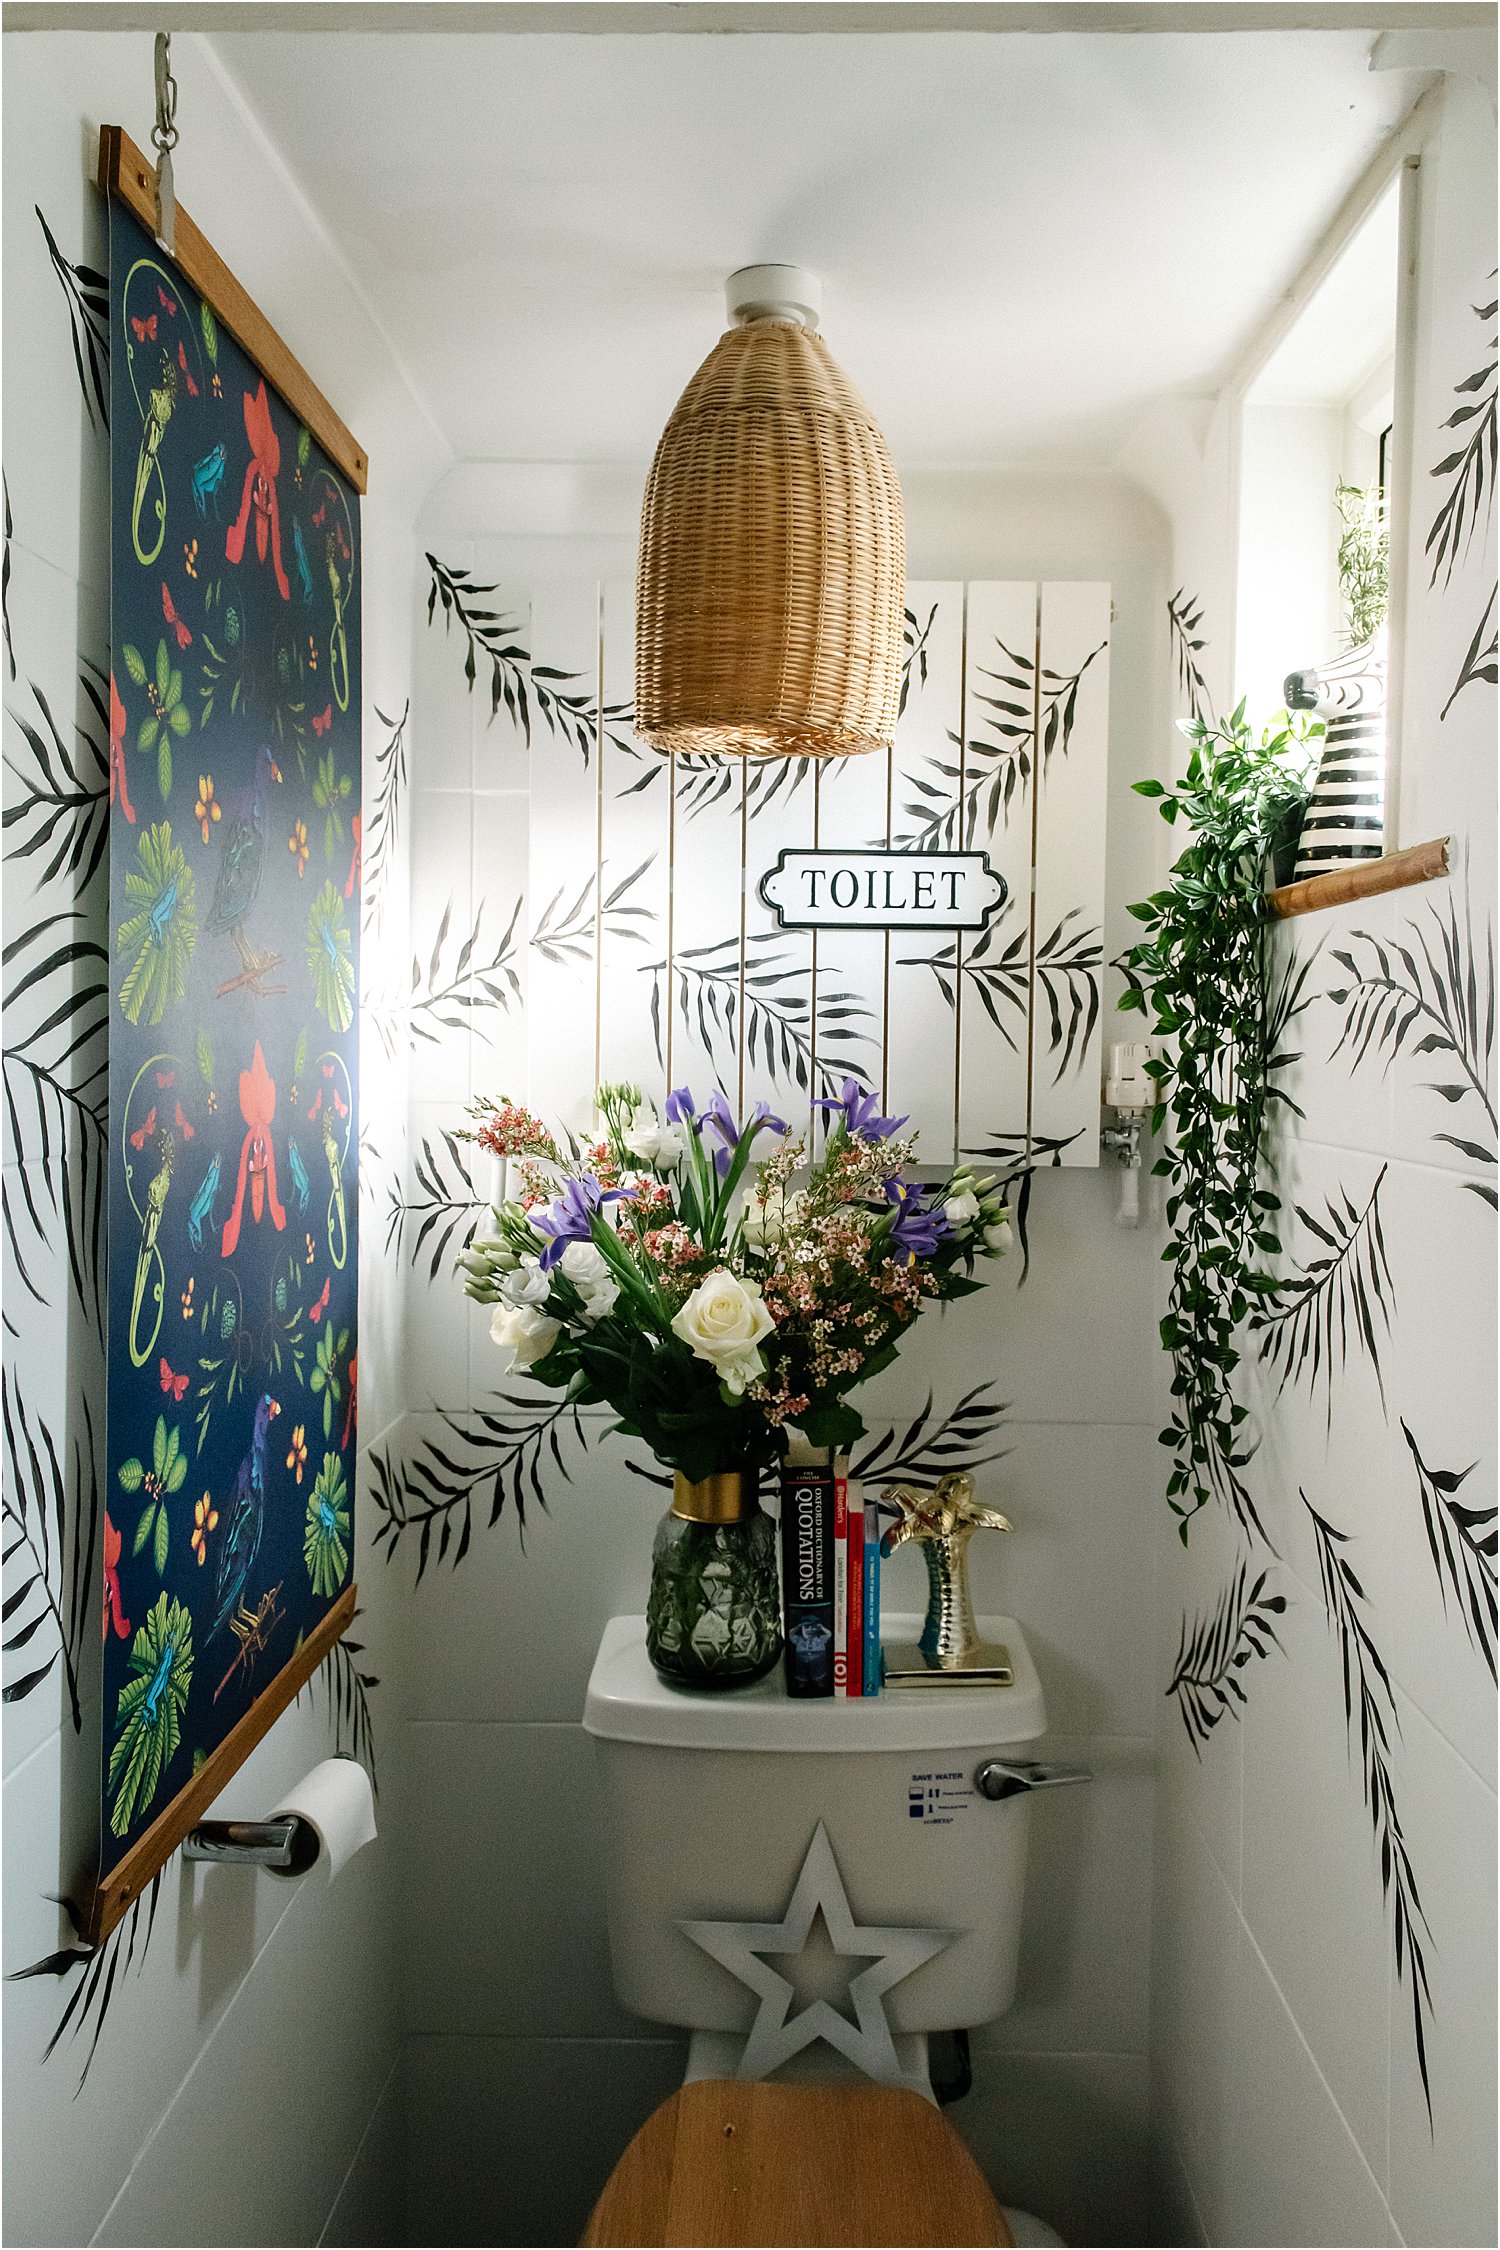 moodboard-toilet-revamp-dull-to-floral-layered-home-interior-design-makeover